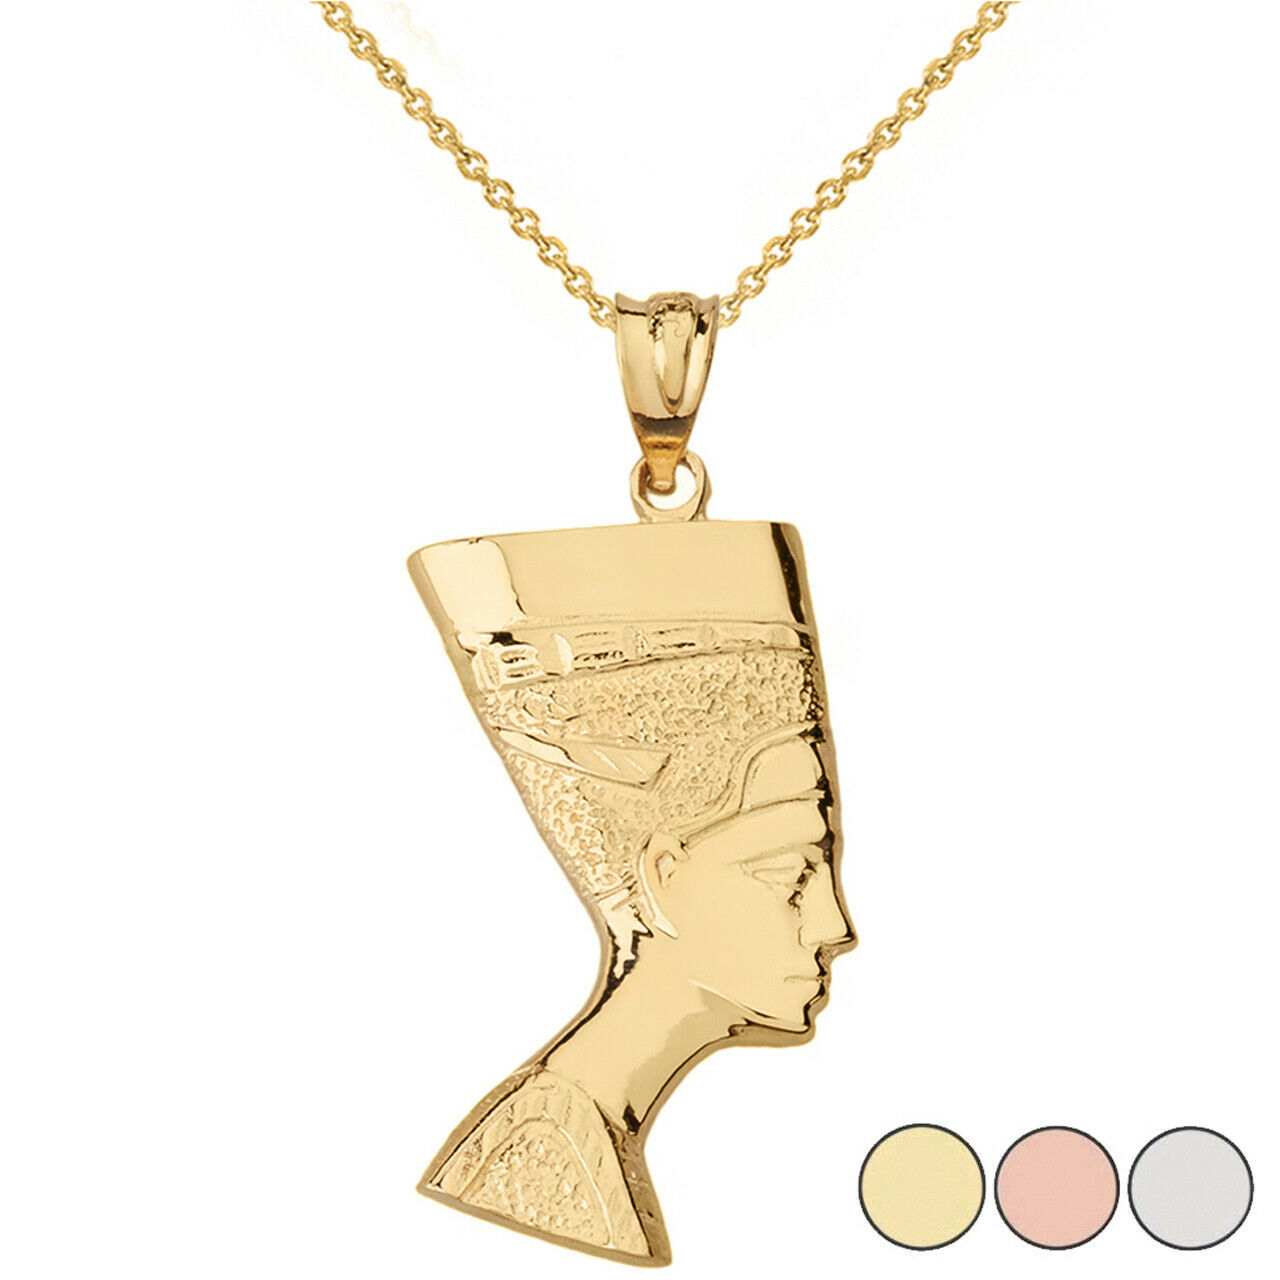 Primary image for Solid 14k Yellow Gold Egyptian Queen Nefertiti Face Statue Pendant Necklace